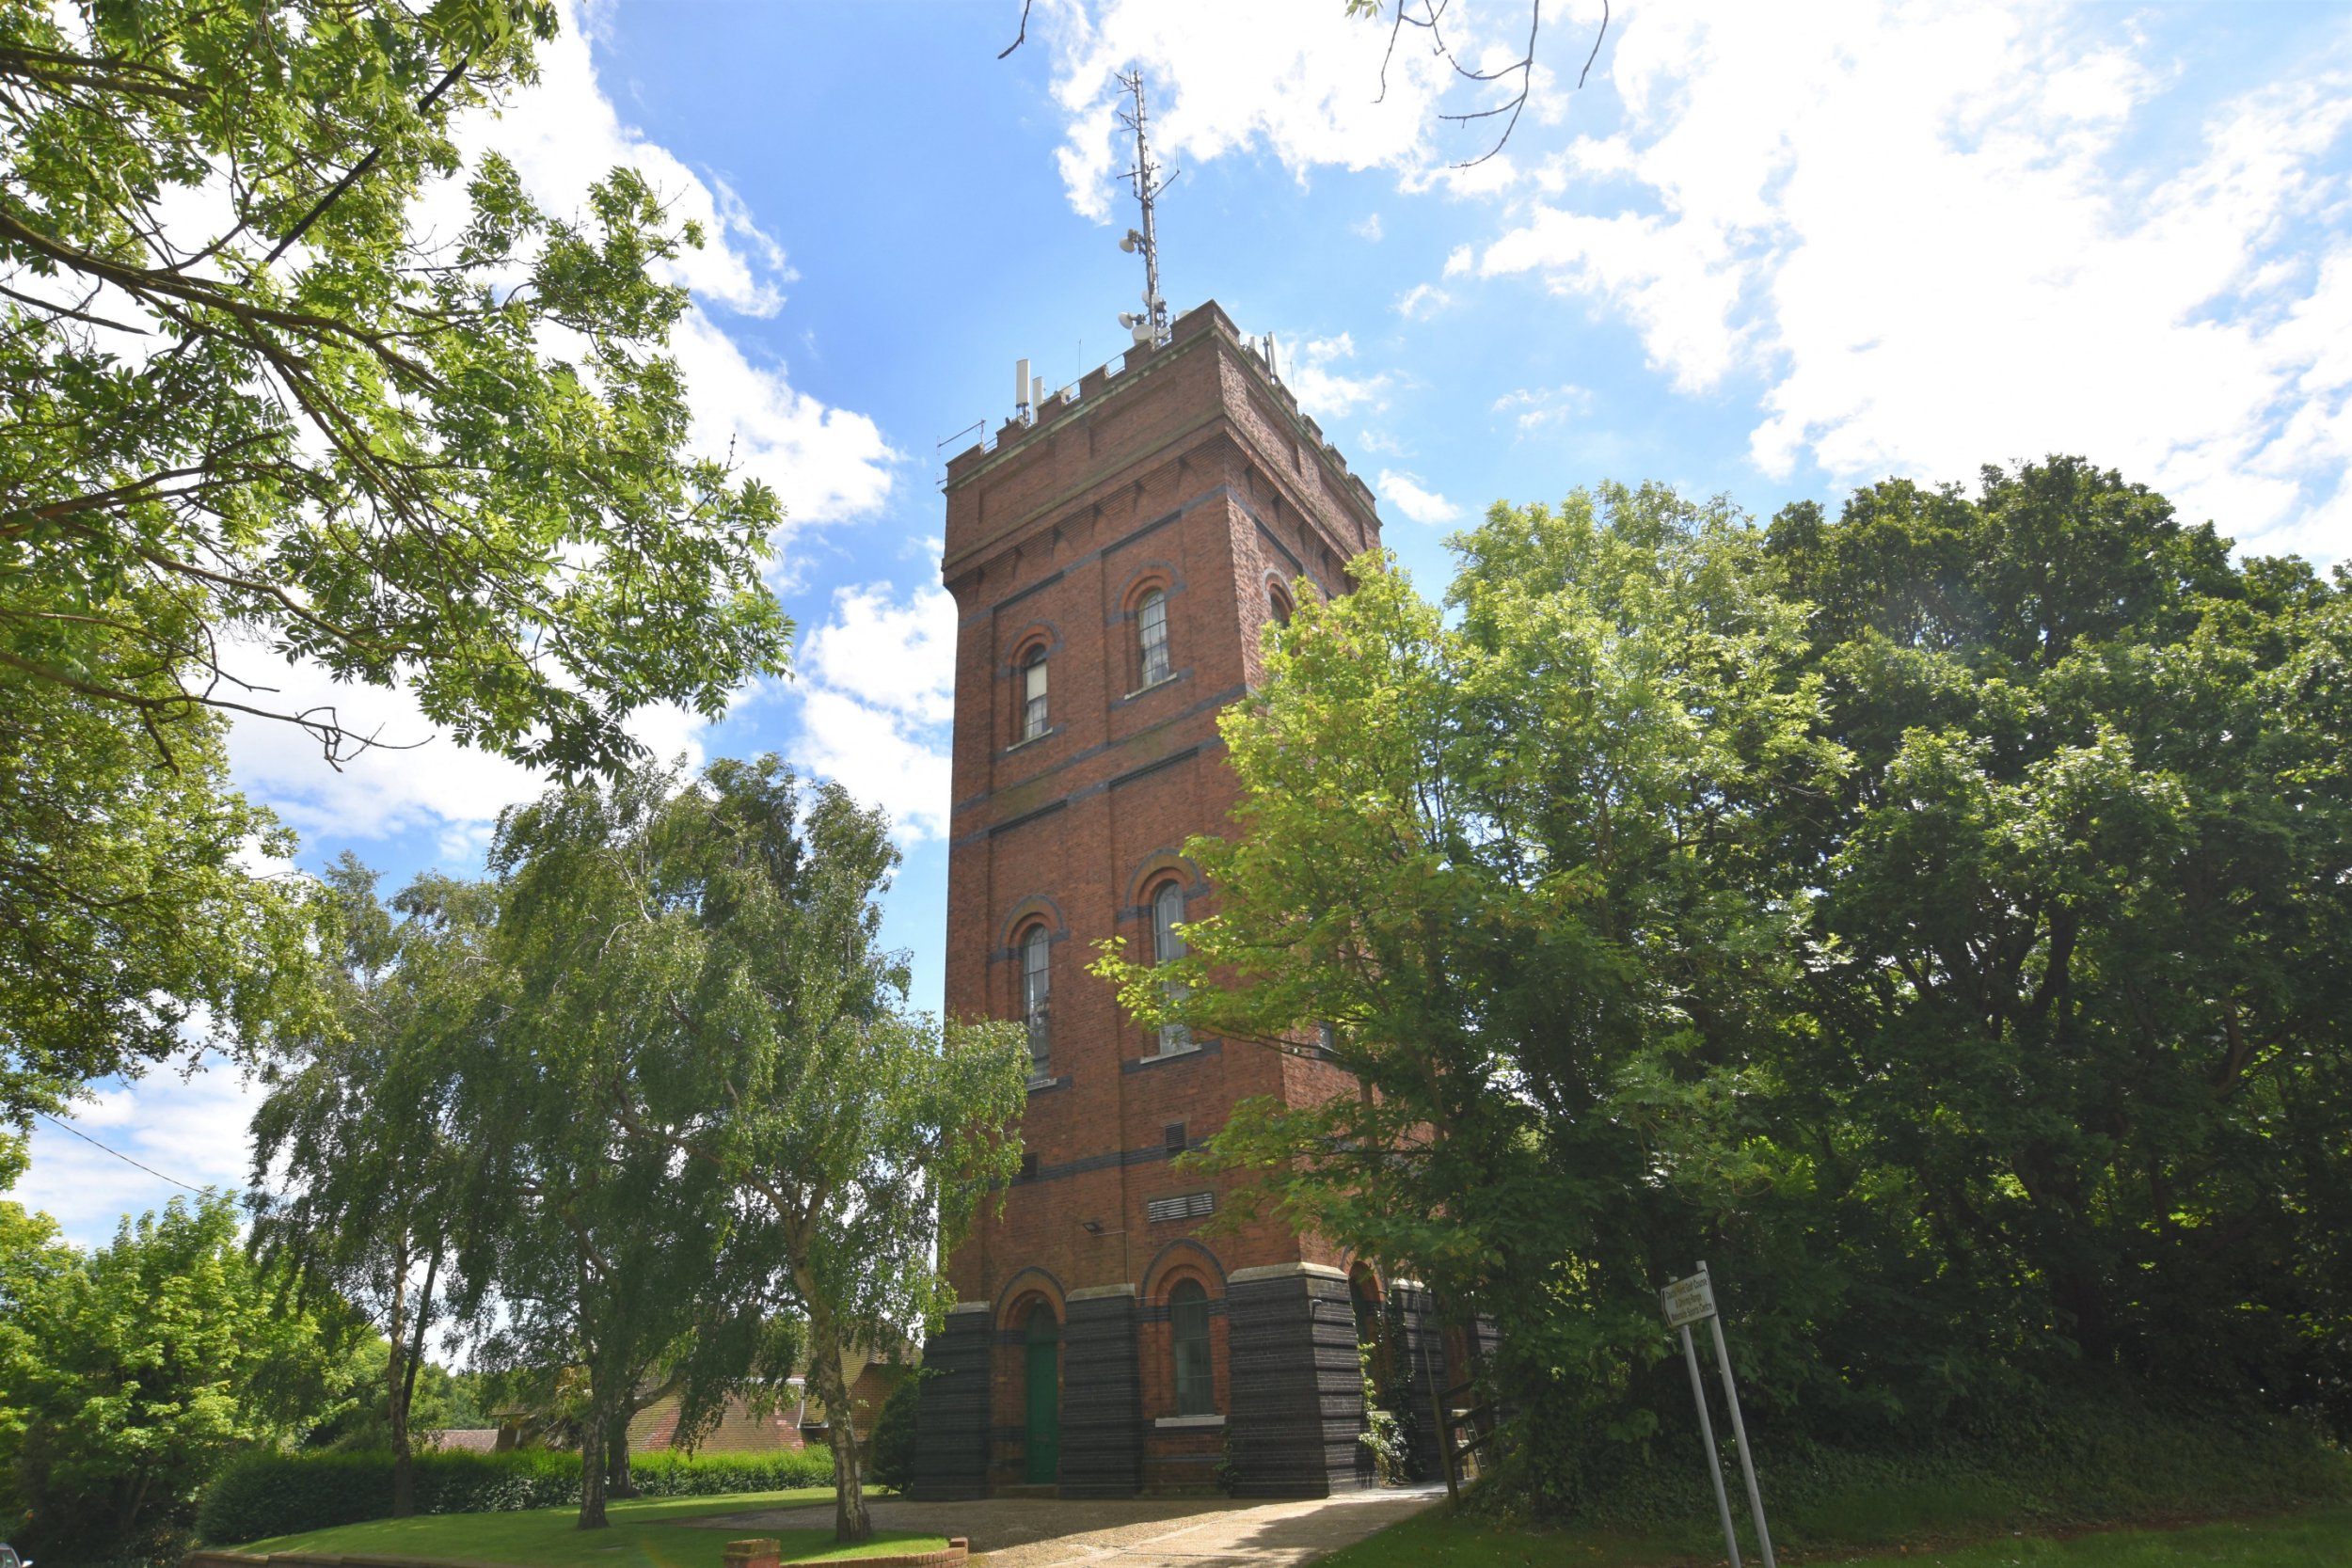 Four-bed flat inside a 90ft tall water tower in Essex goes on sale for £2.1million